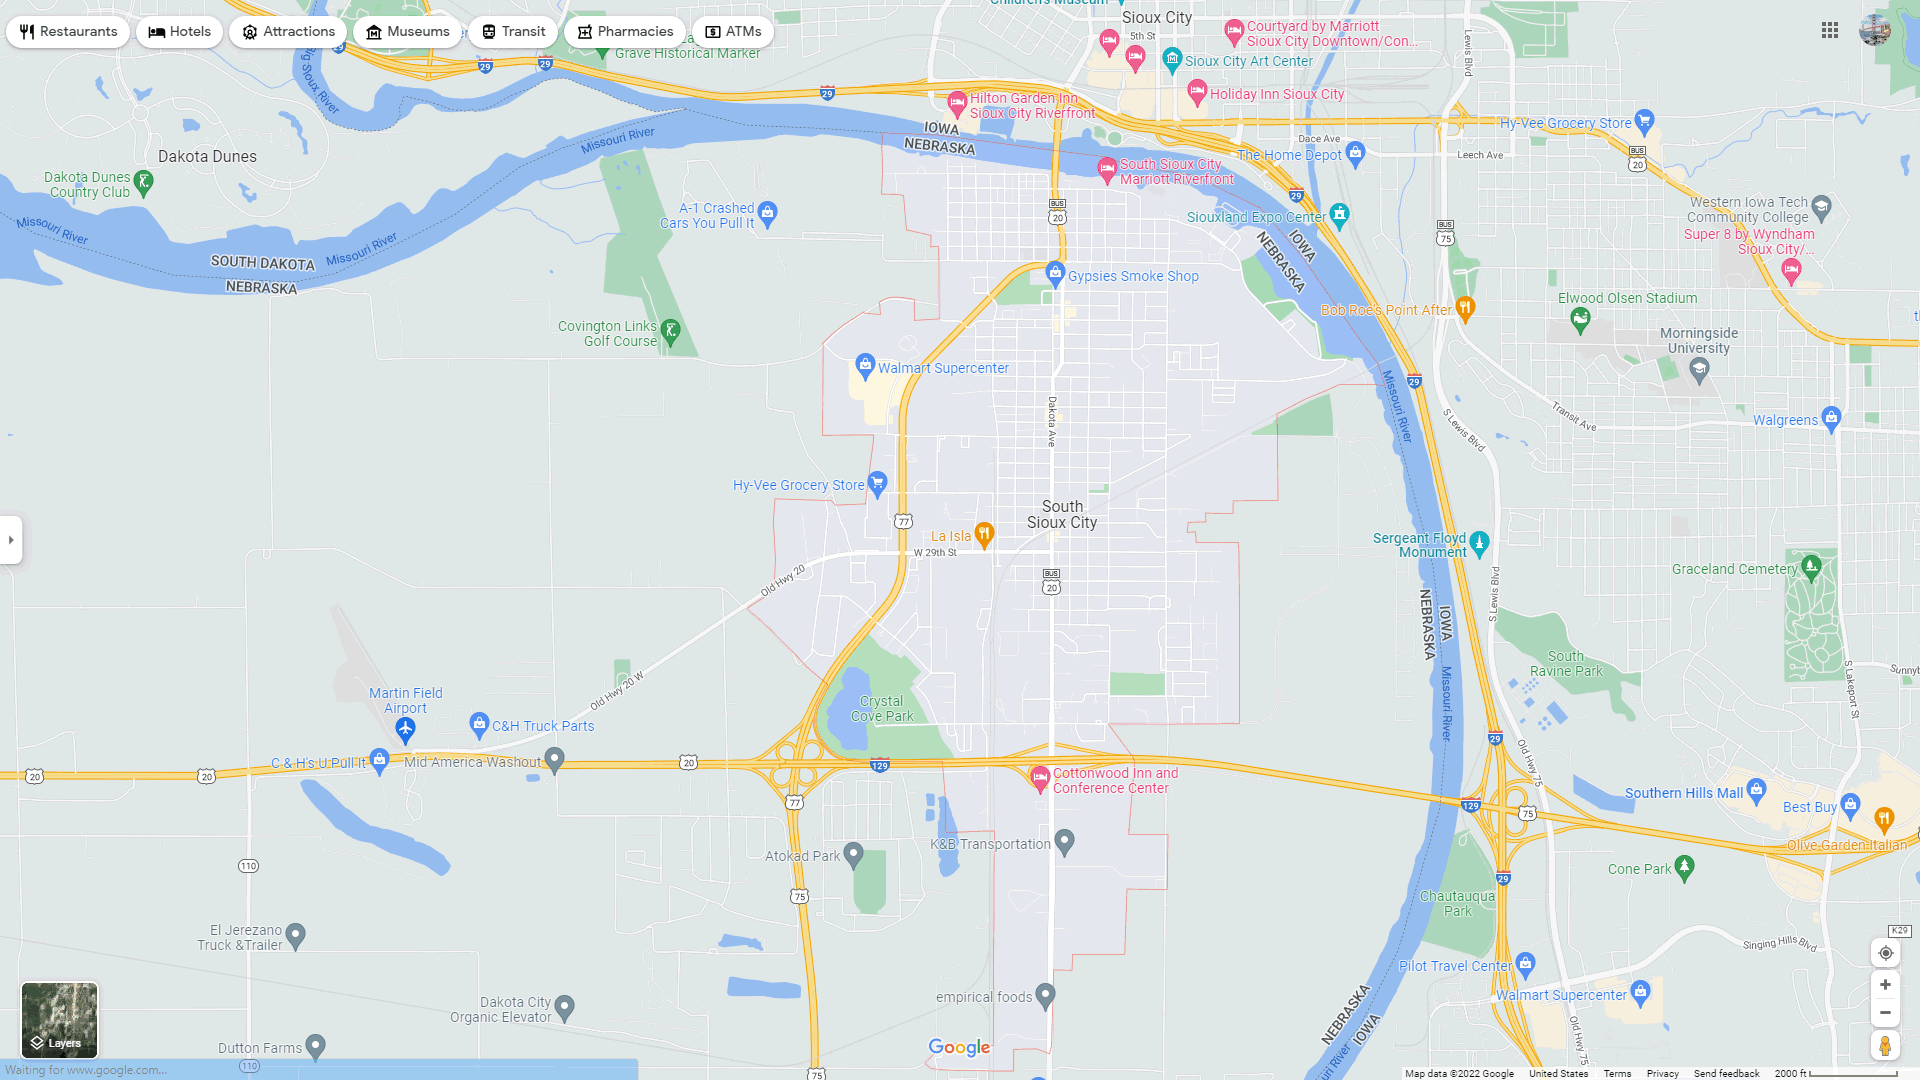 South Sioux City map